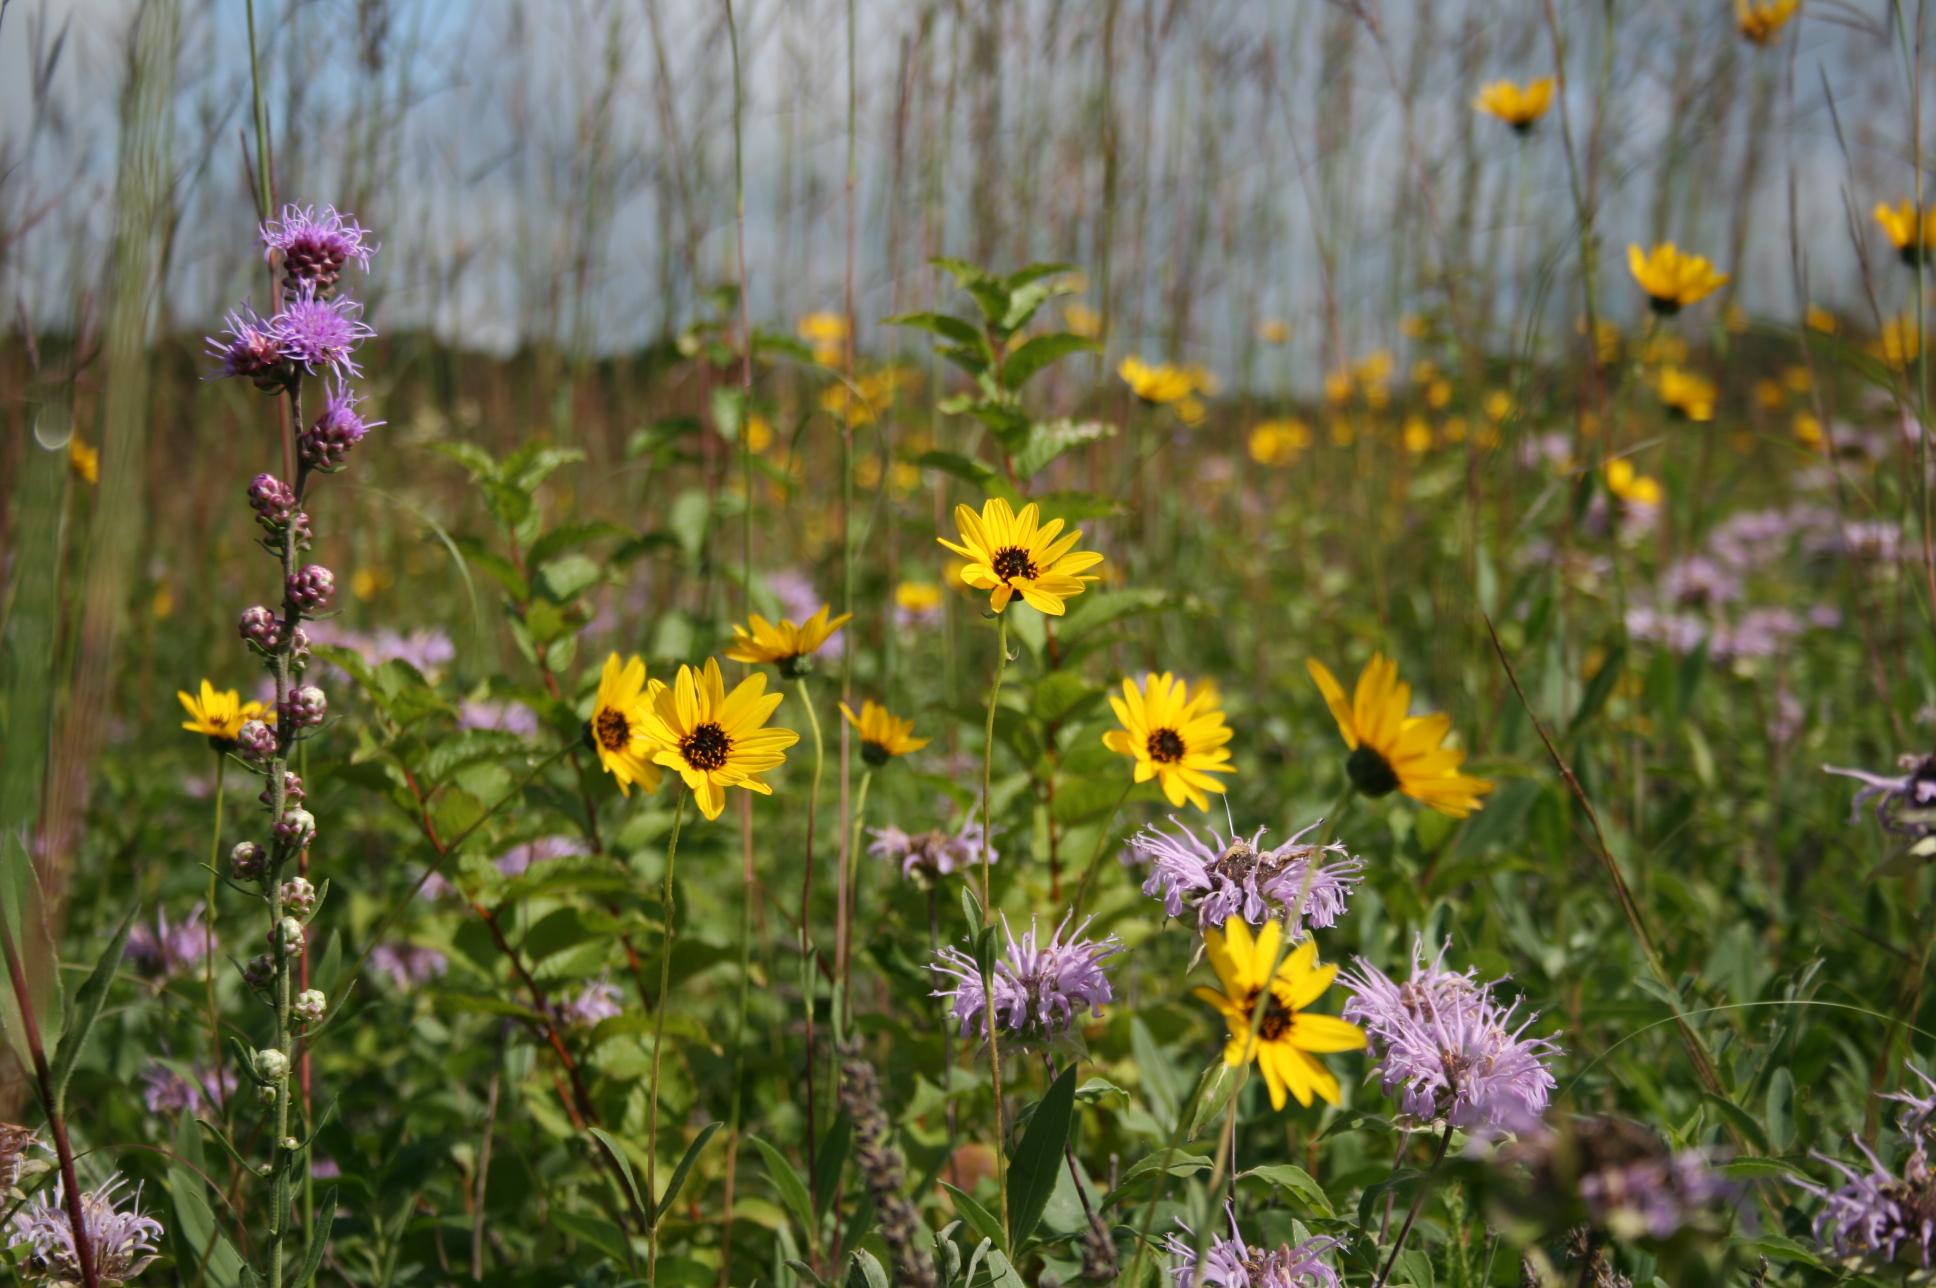 Purple and yellow wildflowers in a field of tall grass